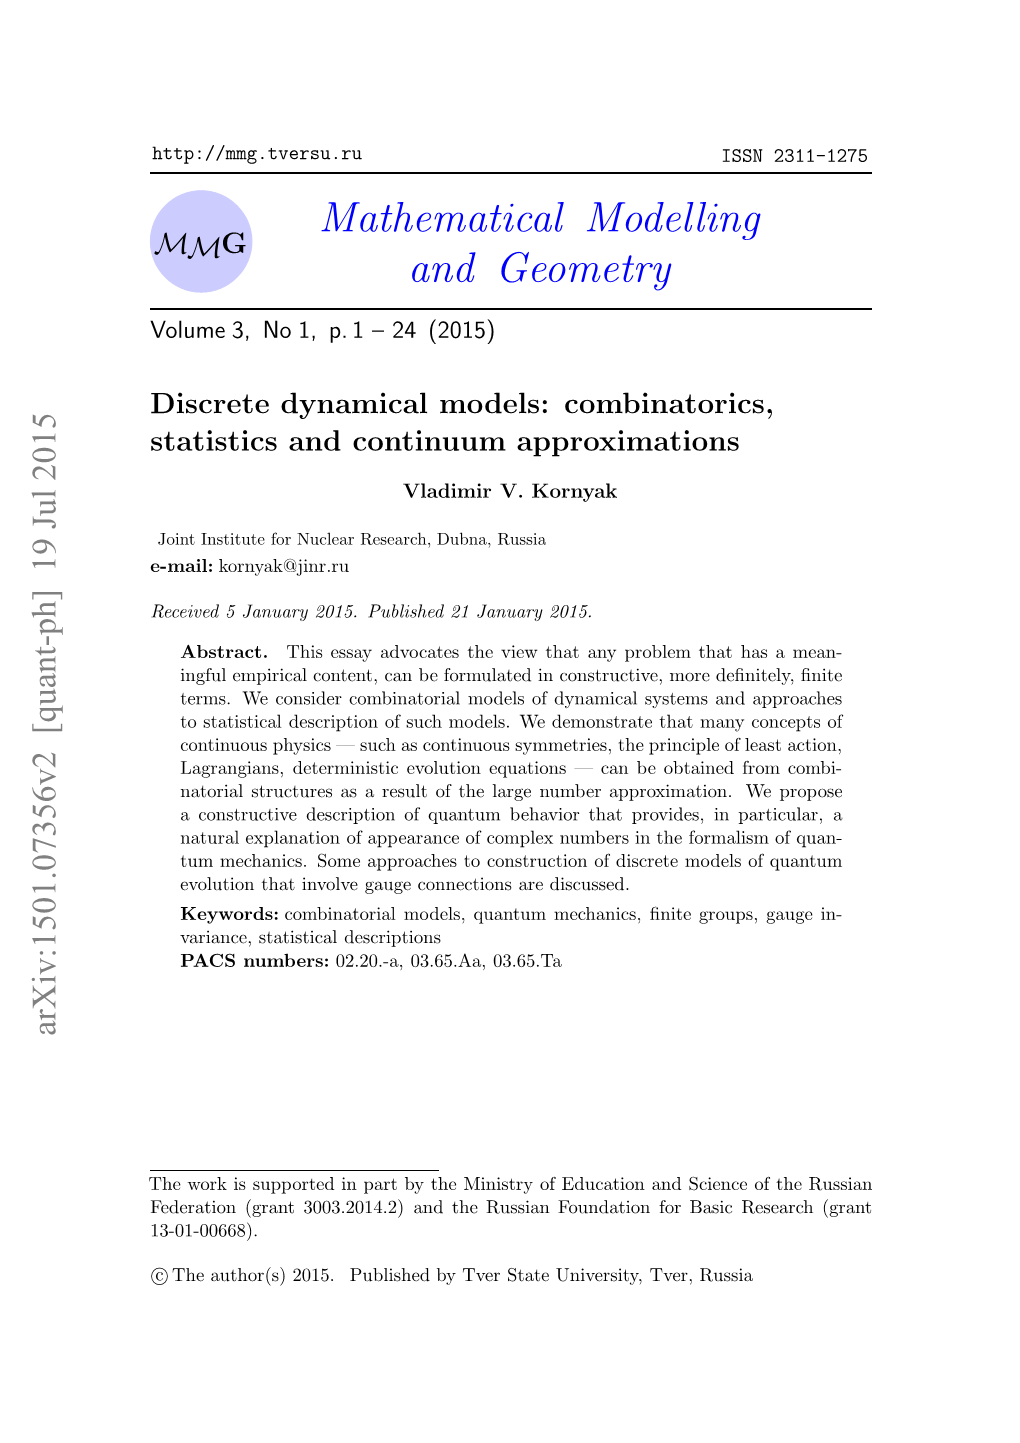 Mathematical Modelling and Geometry